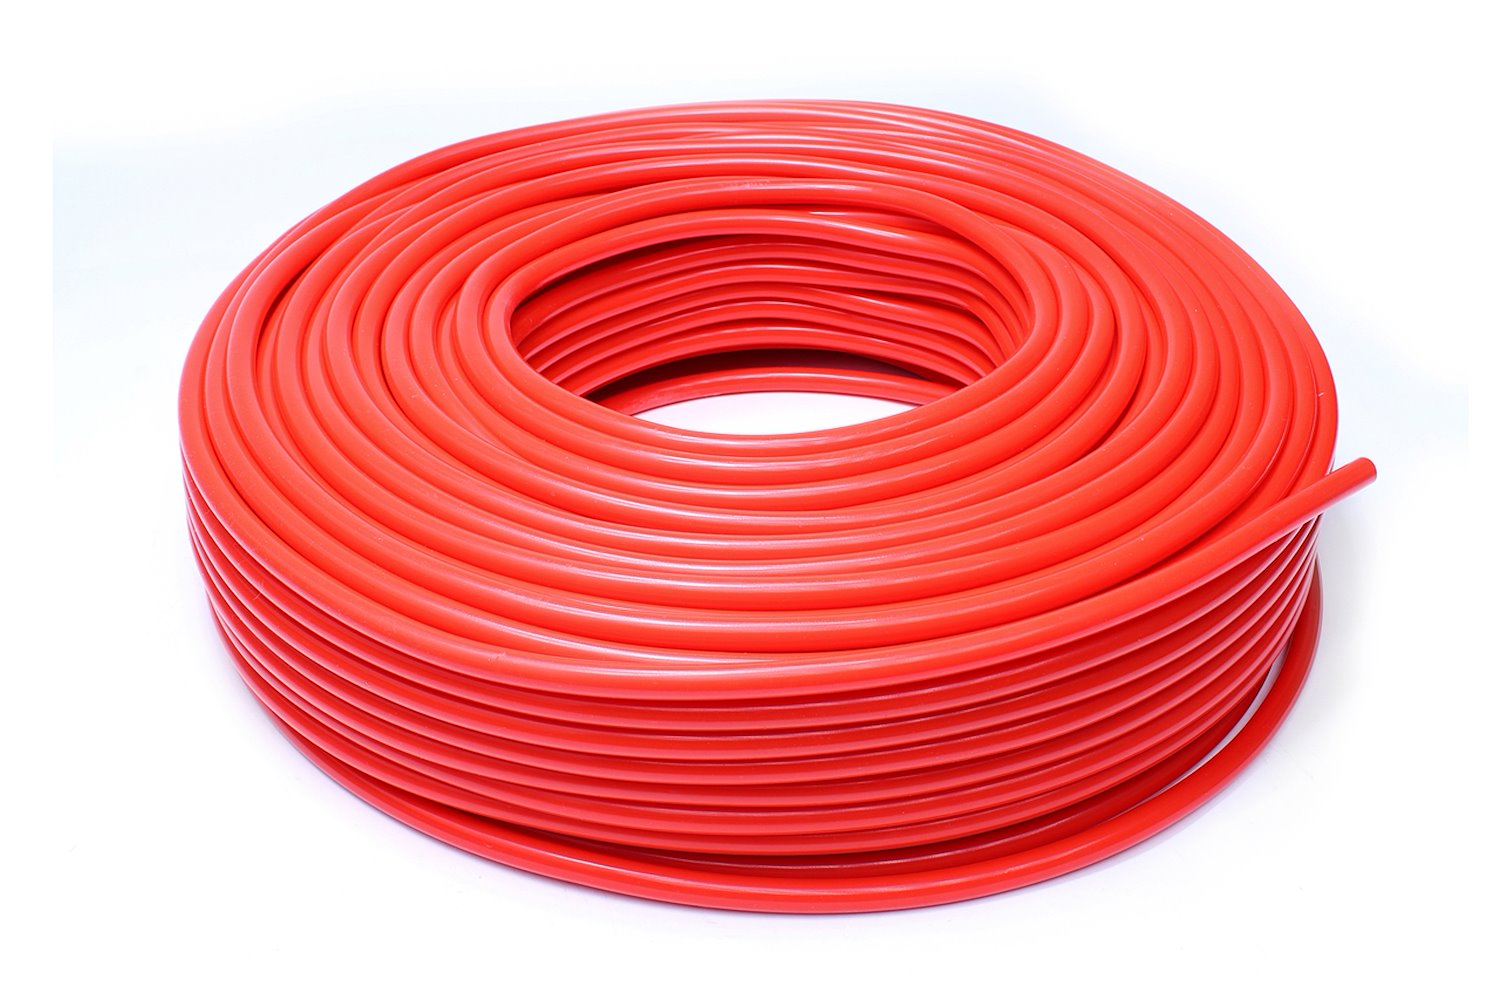 HTSVH5-REDx100 High-Temperature Silicone Vacuum Hose Tubing, 13/64 in. ID, 100 ft. Roll, Red